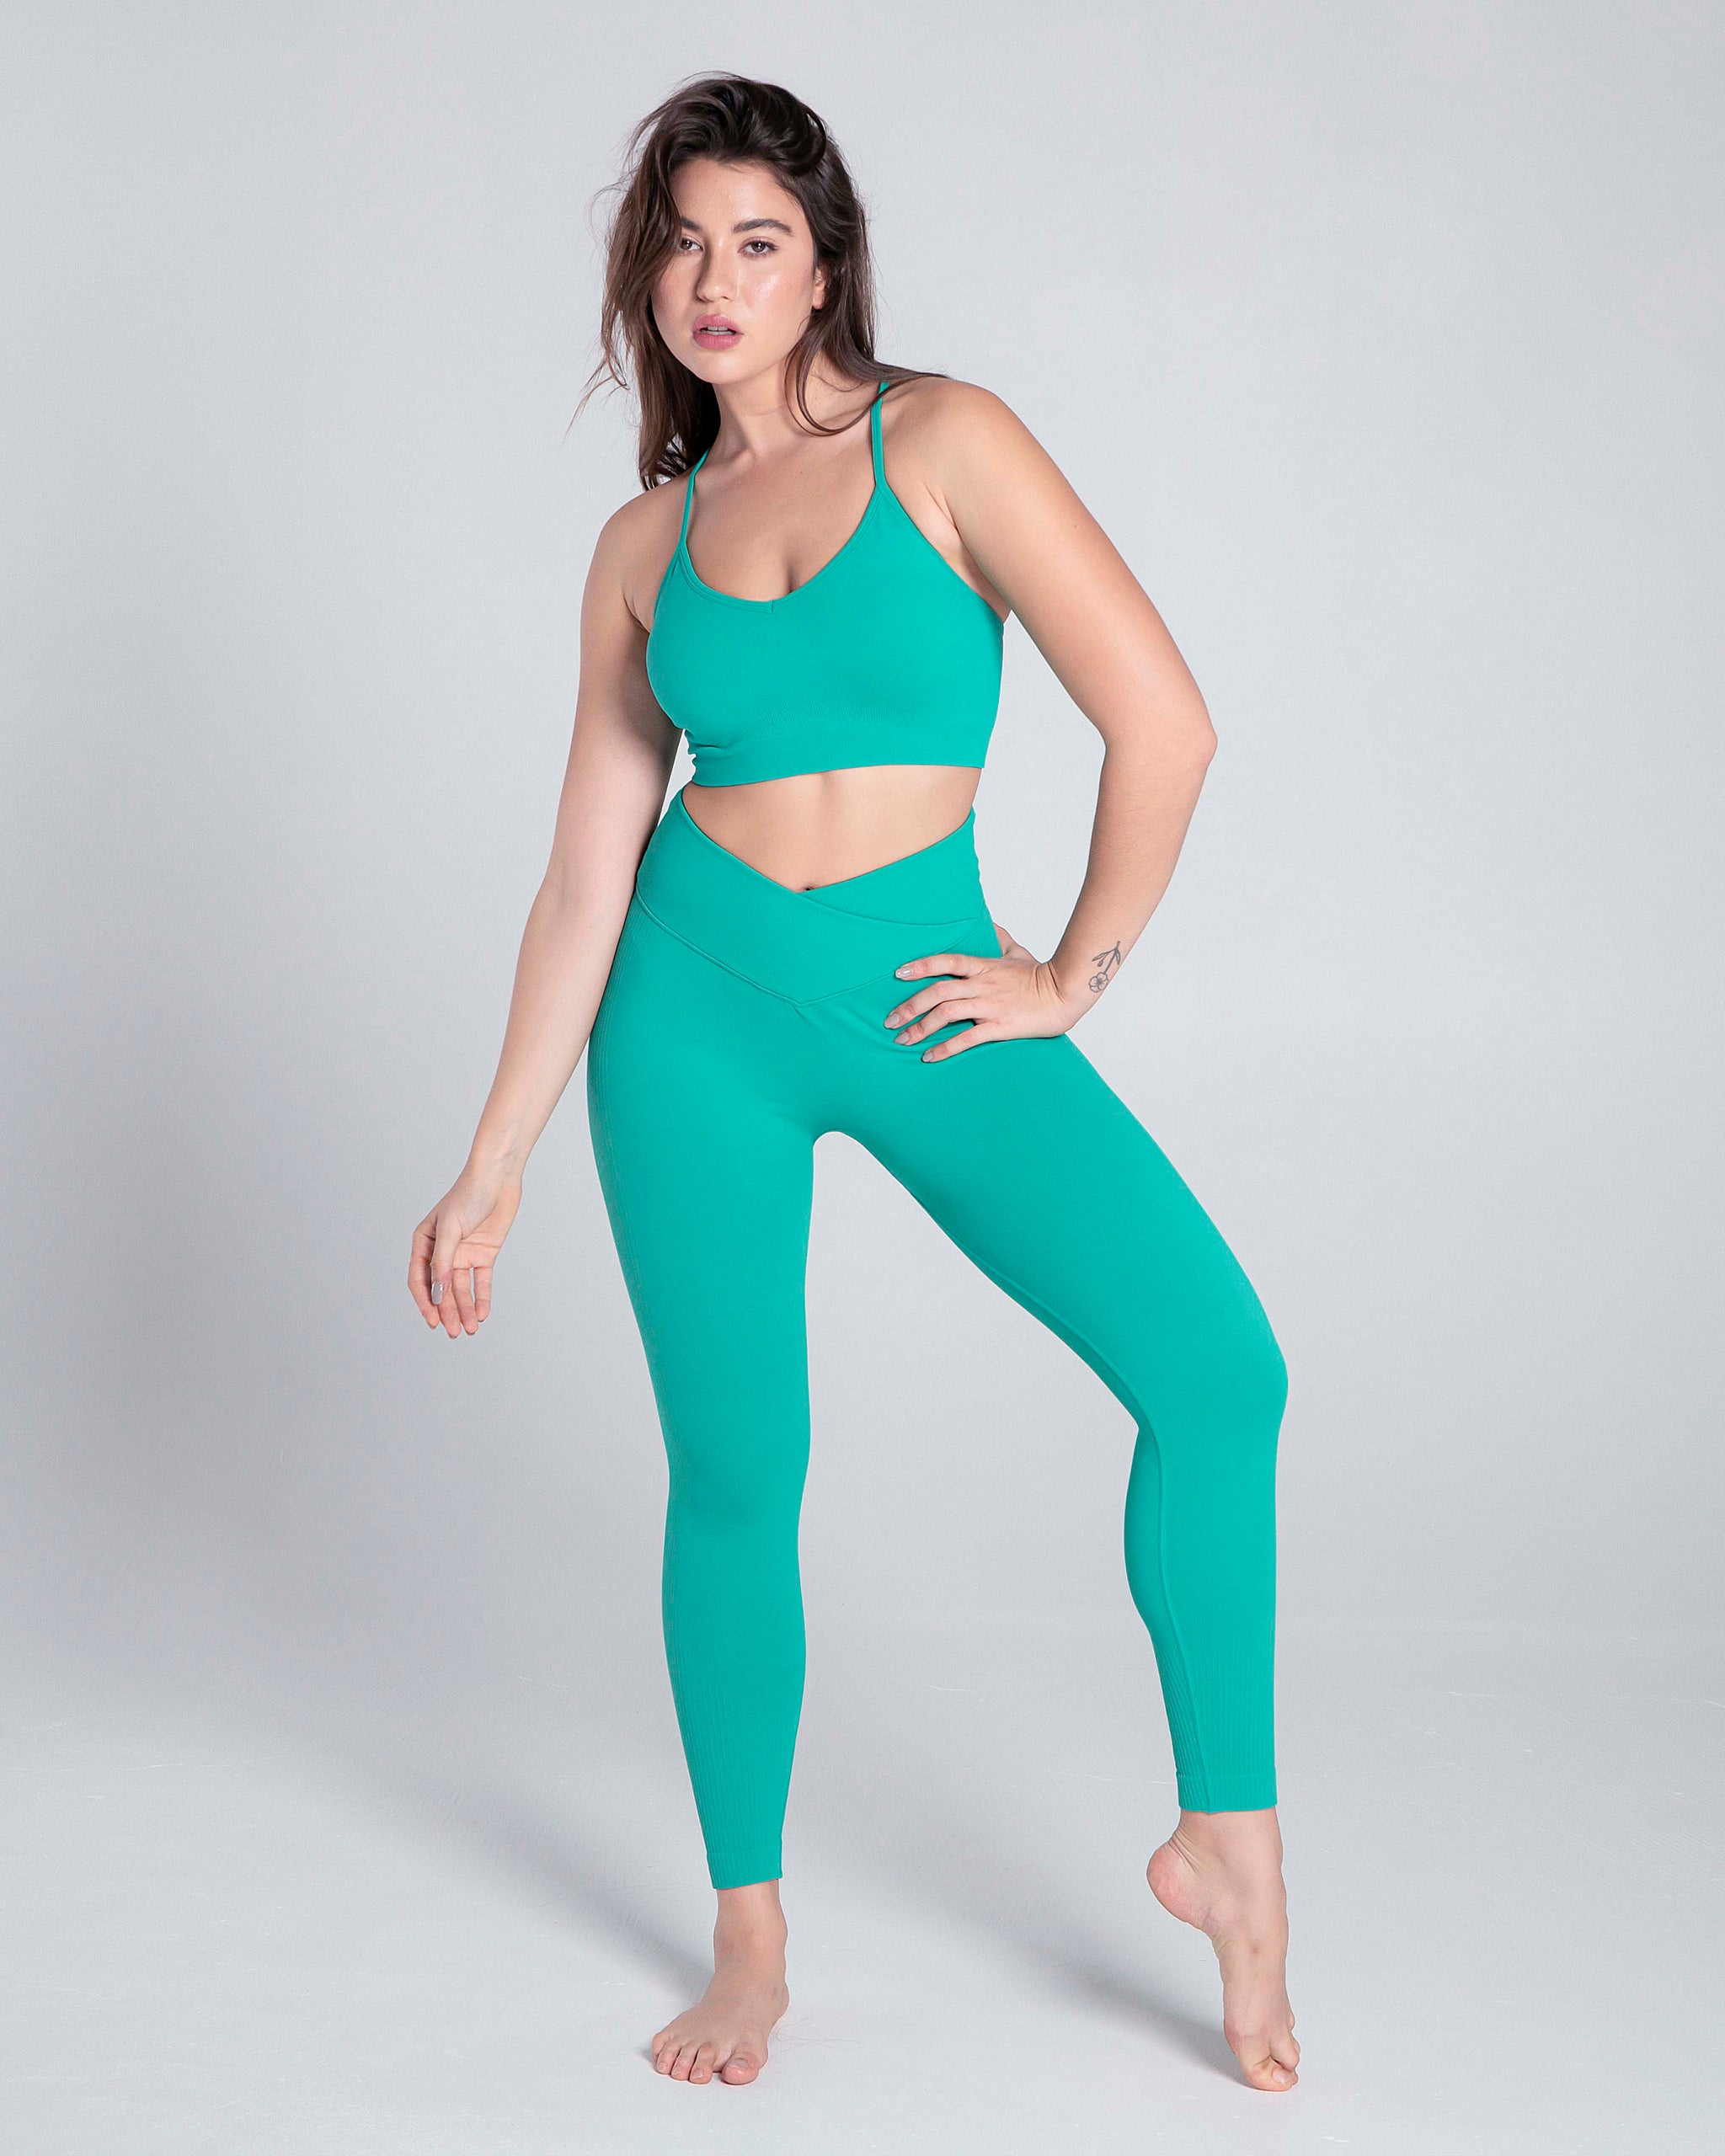 These Crossover Leggings That Come in 20+ Colors Have the 'Perfect